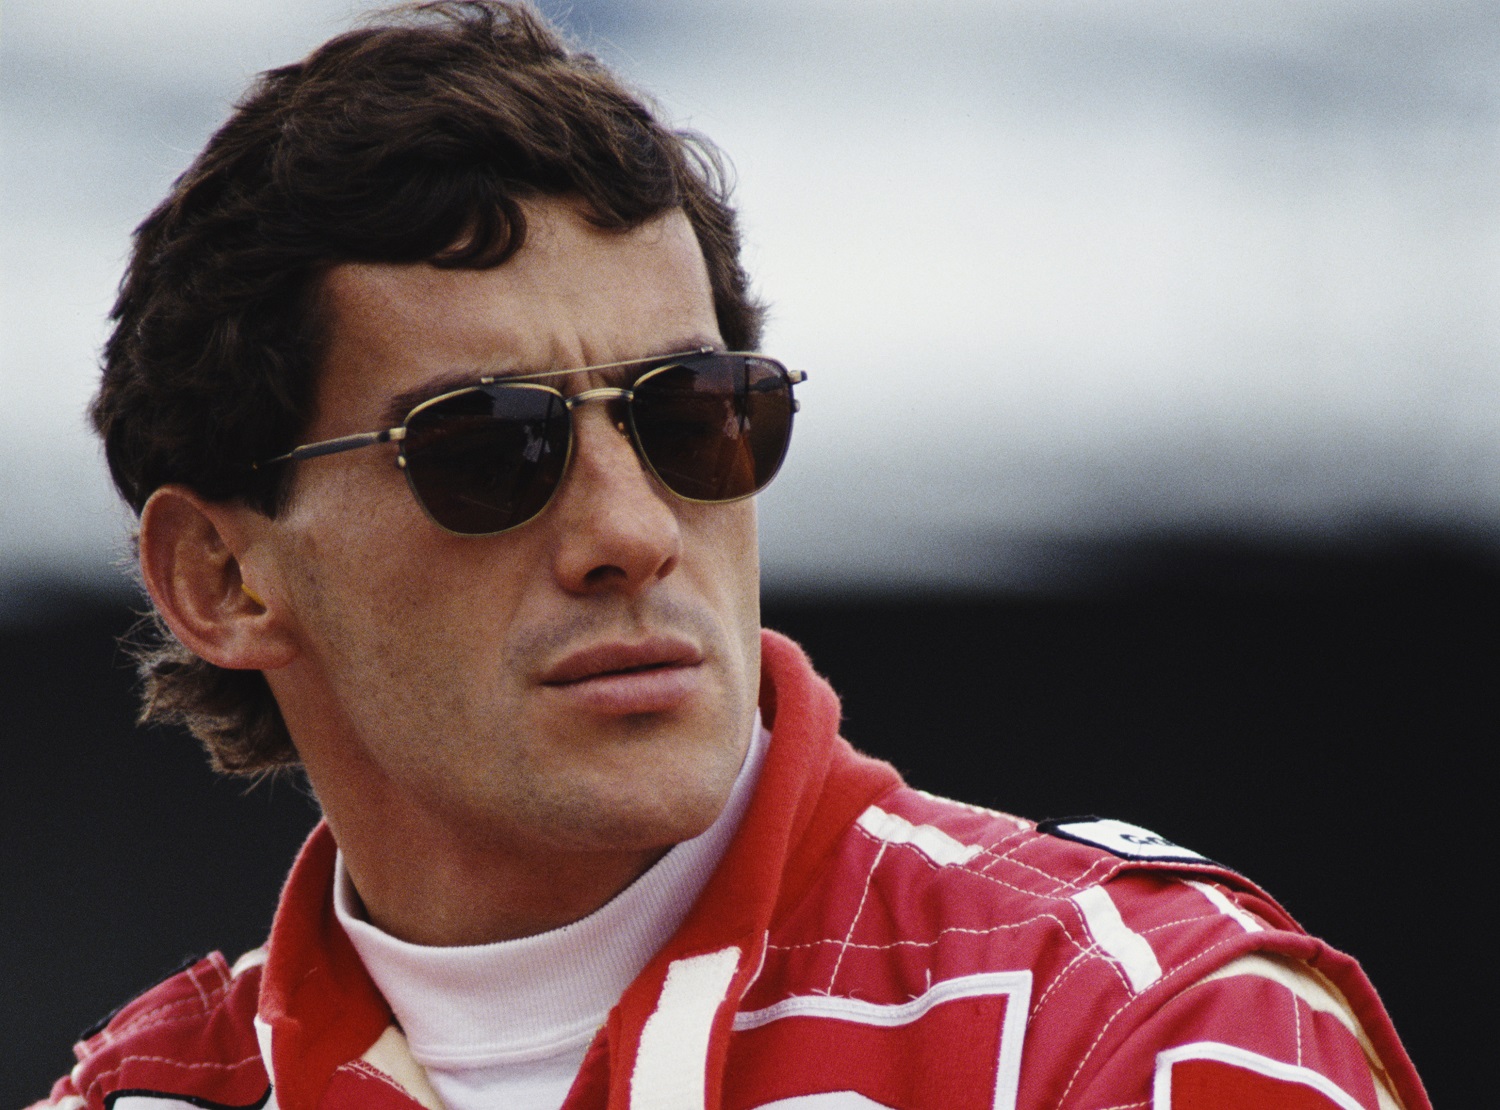 Ayrton Senna Is Inextricably Linked to Imola, but There Were 2 Formula 1 Tragedies That Weekend